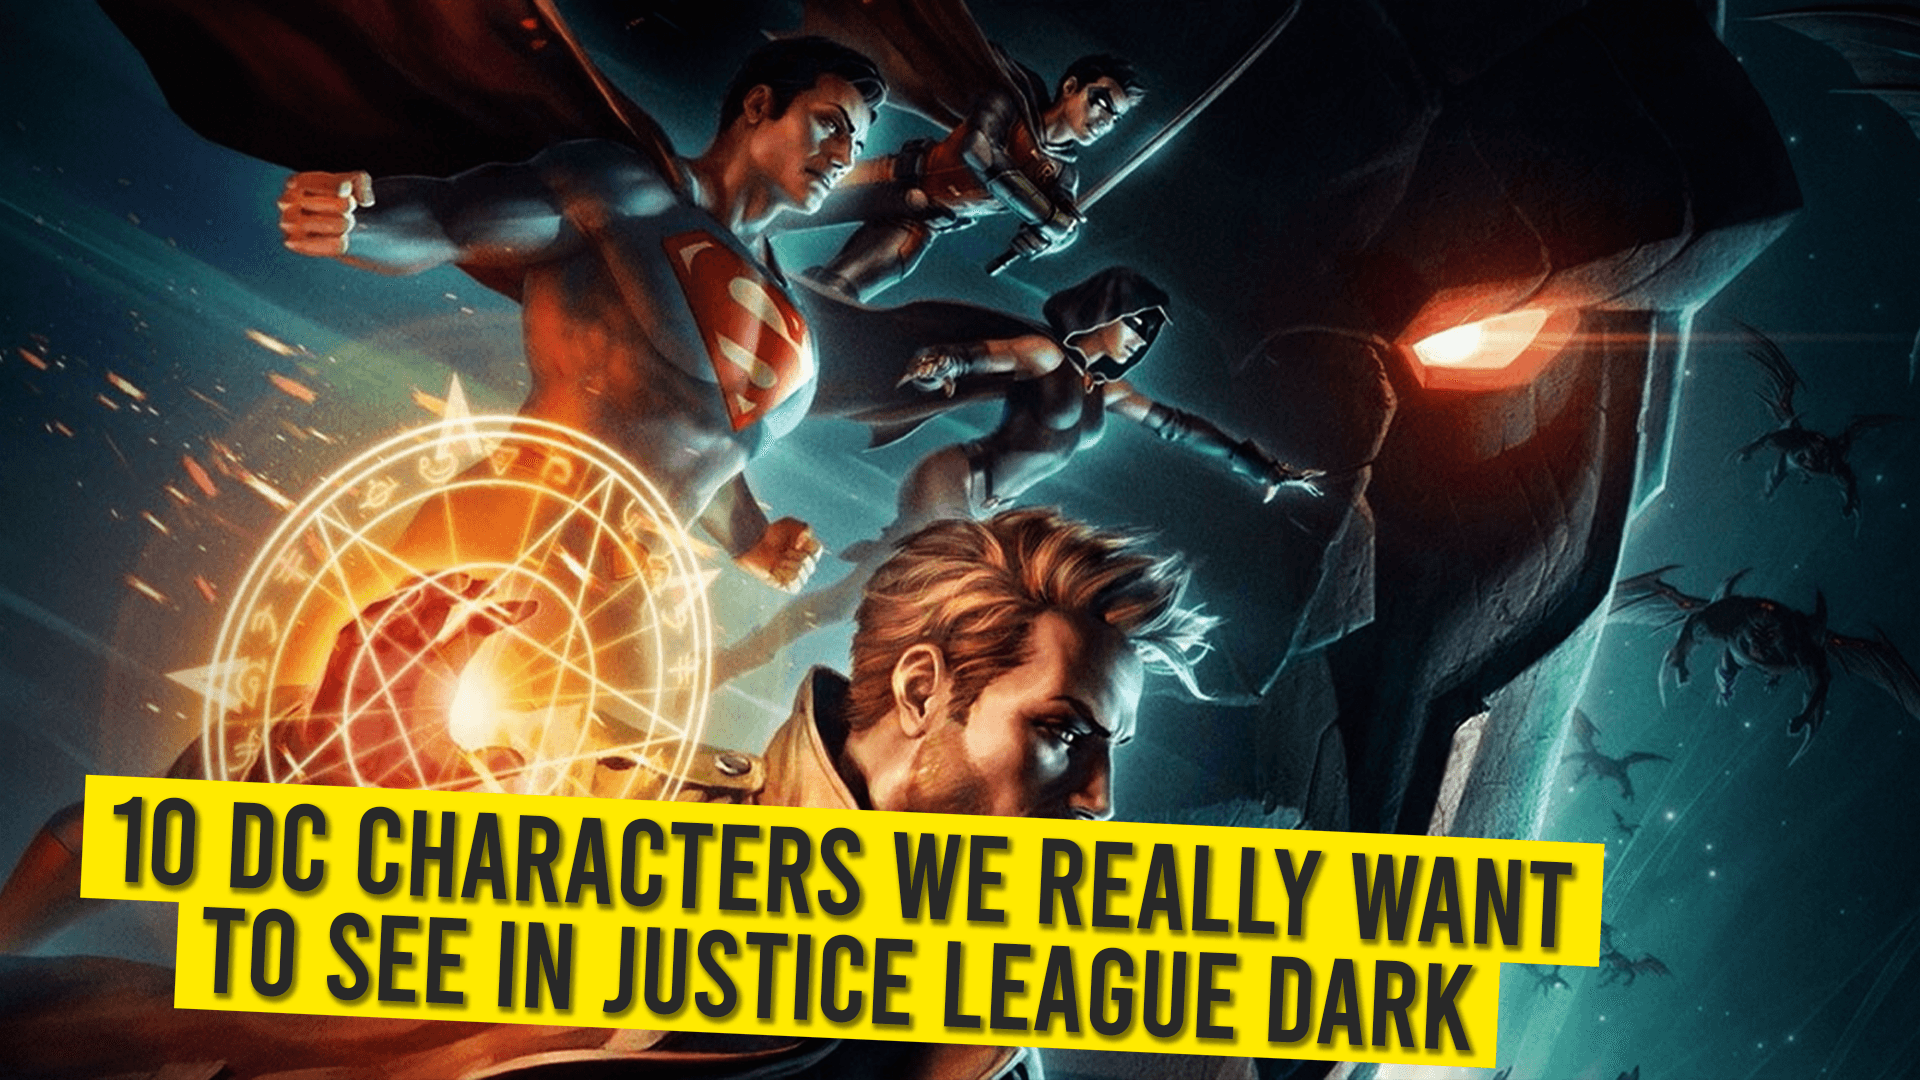 10 DC Characters We Really Want to See in Justice League Dark